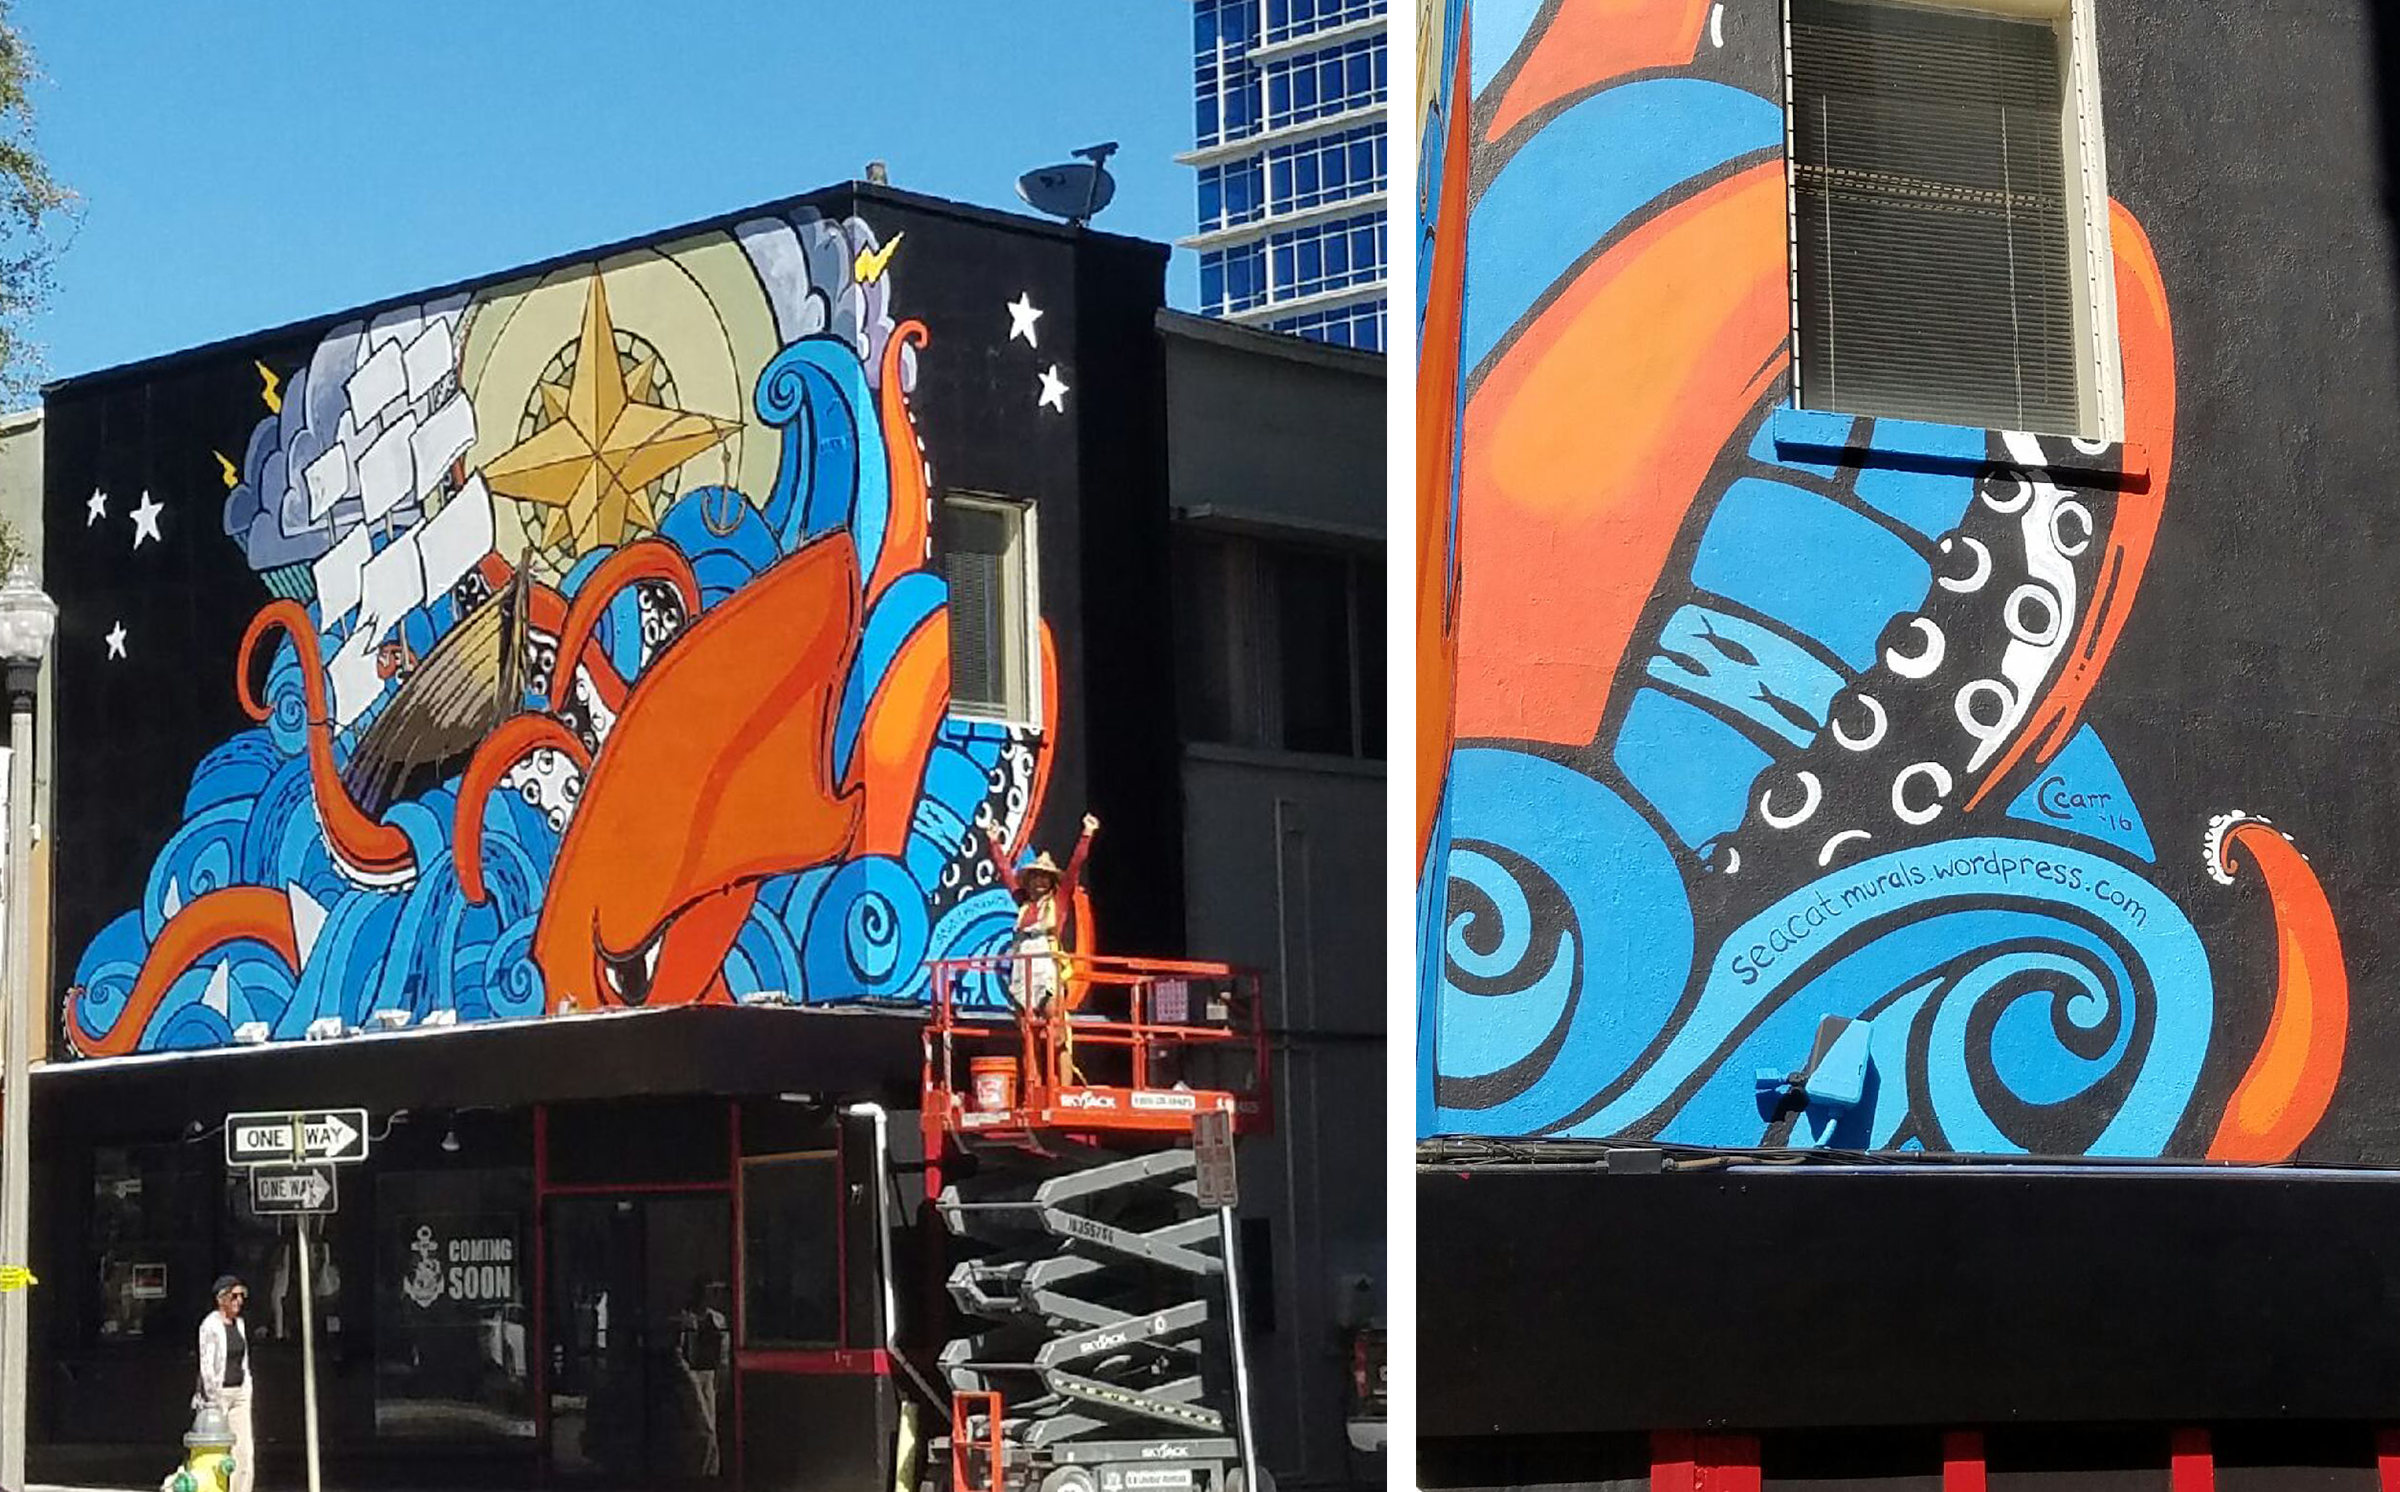 Seacat Murals created the artwork on the outside of The Galley, a new restaurant opening in December in St. Pete.